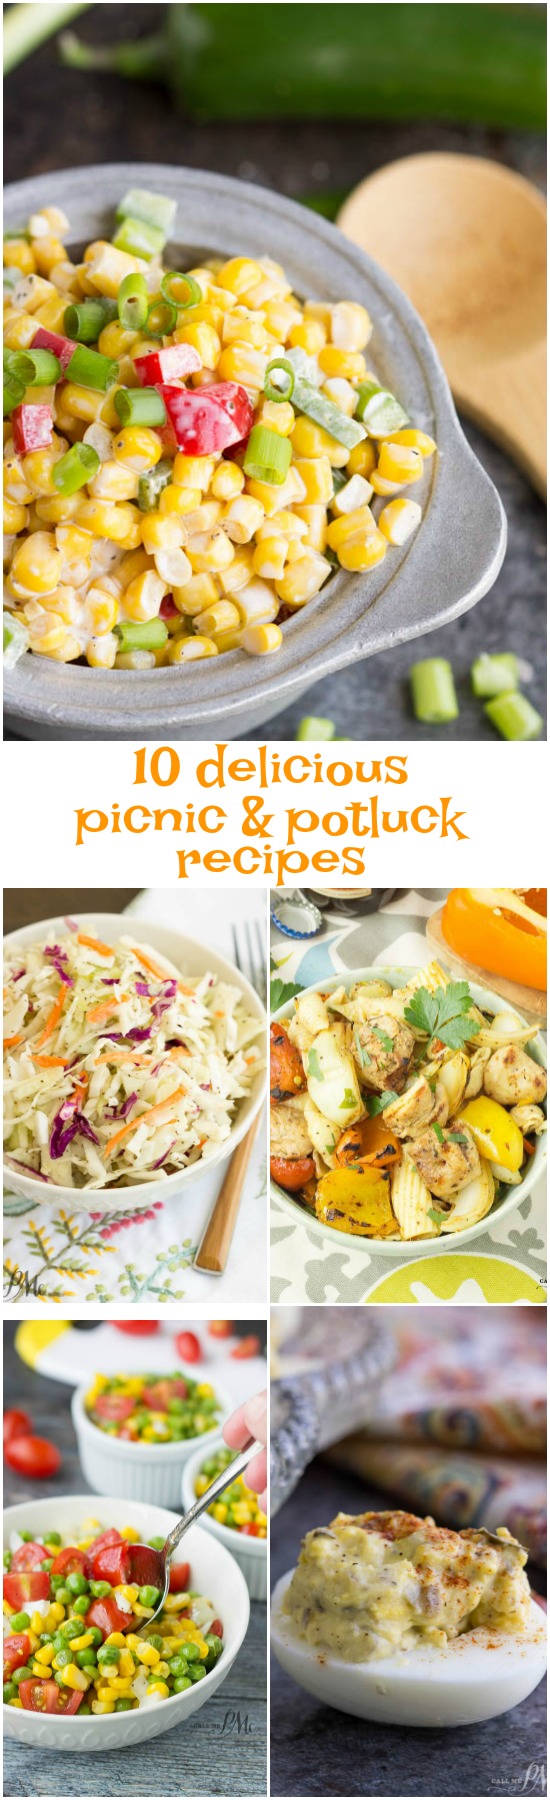 Must-have picnic and potluck recipes to make this summer